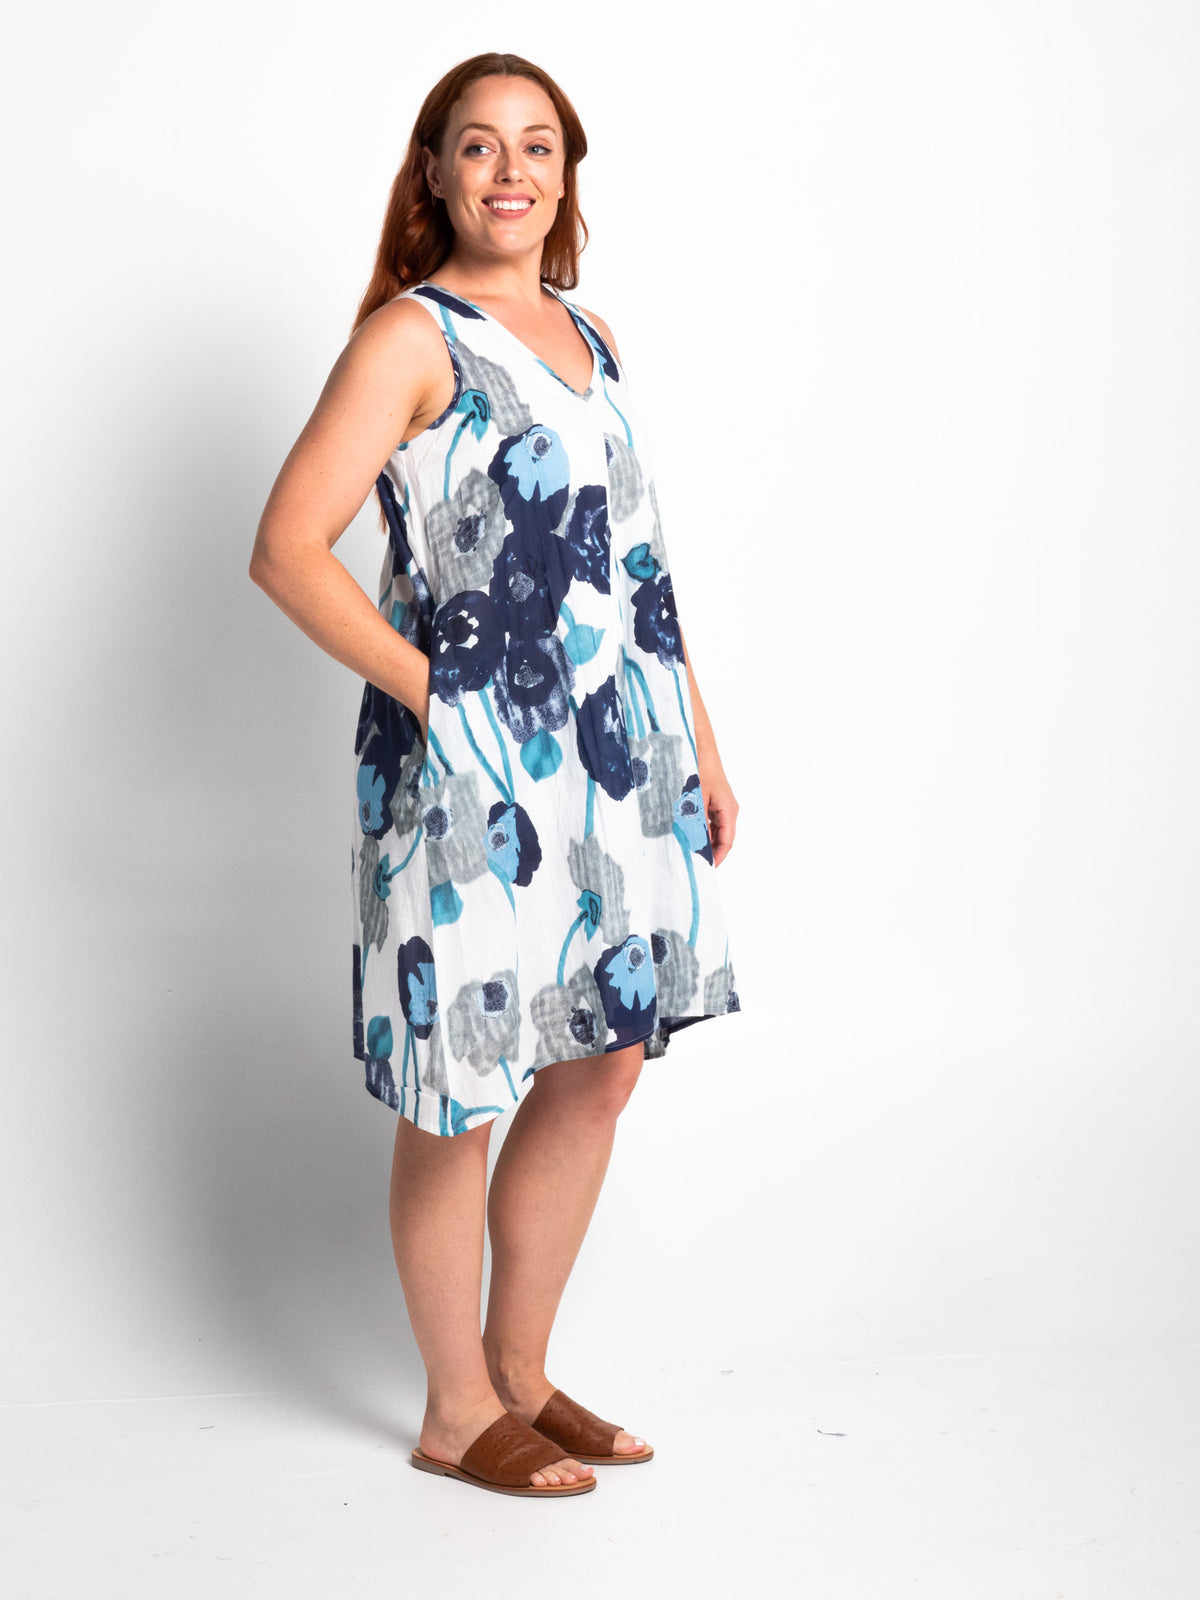 Coolum Dress in Blue Poppies